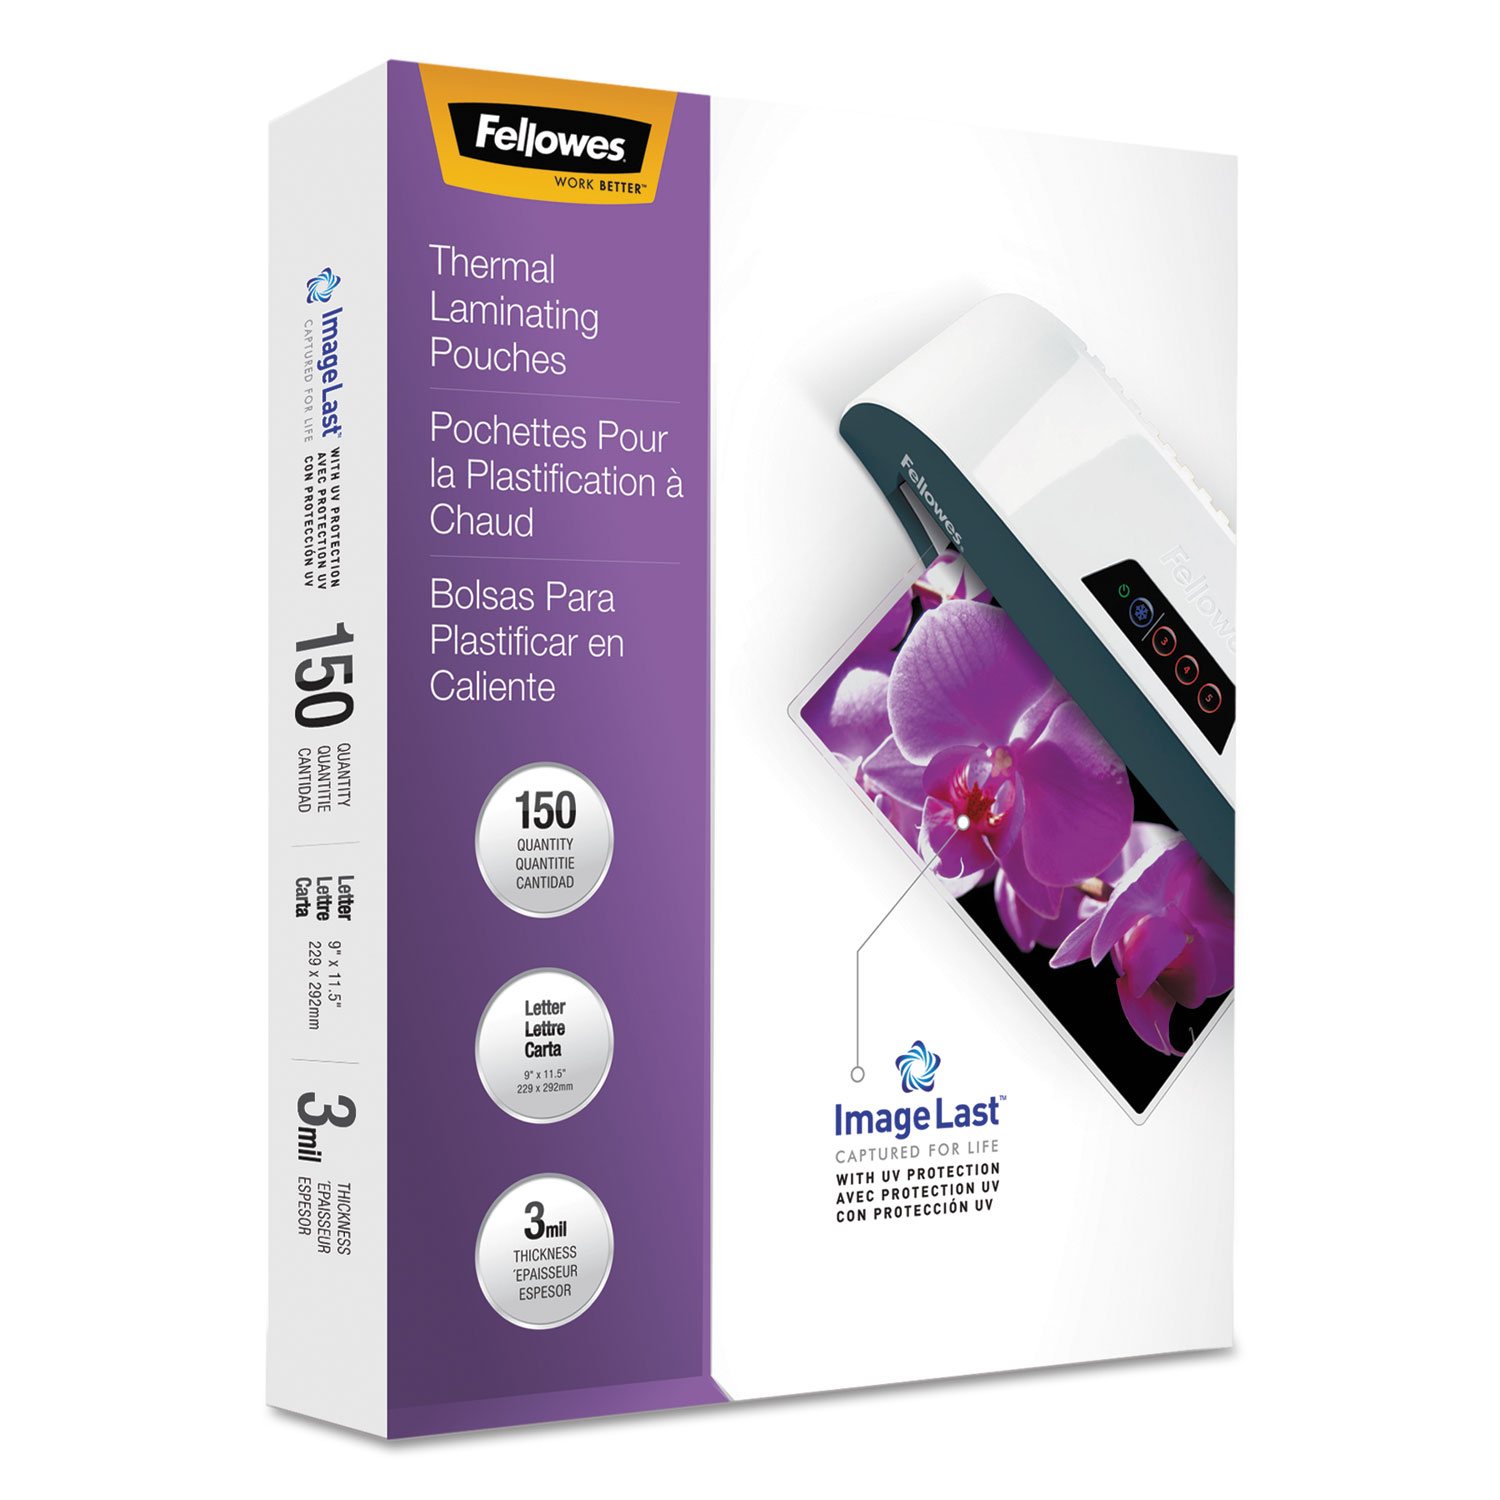  Fellowes 5200509 ImageLast Laminating Pouches with UV Protection, 3 mil, 9 x 11.5, Clear, 150/Pack (FEL5200509) 